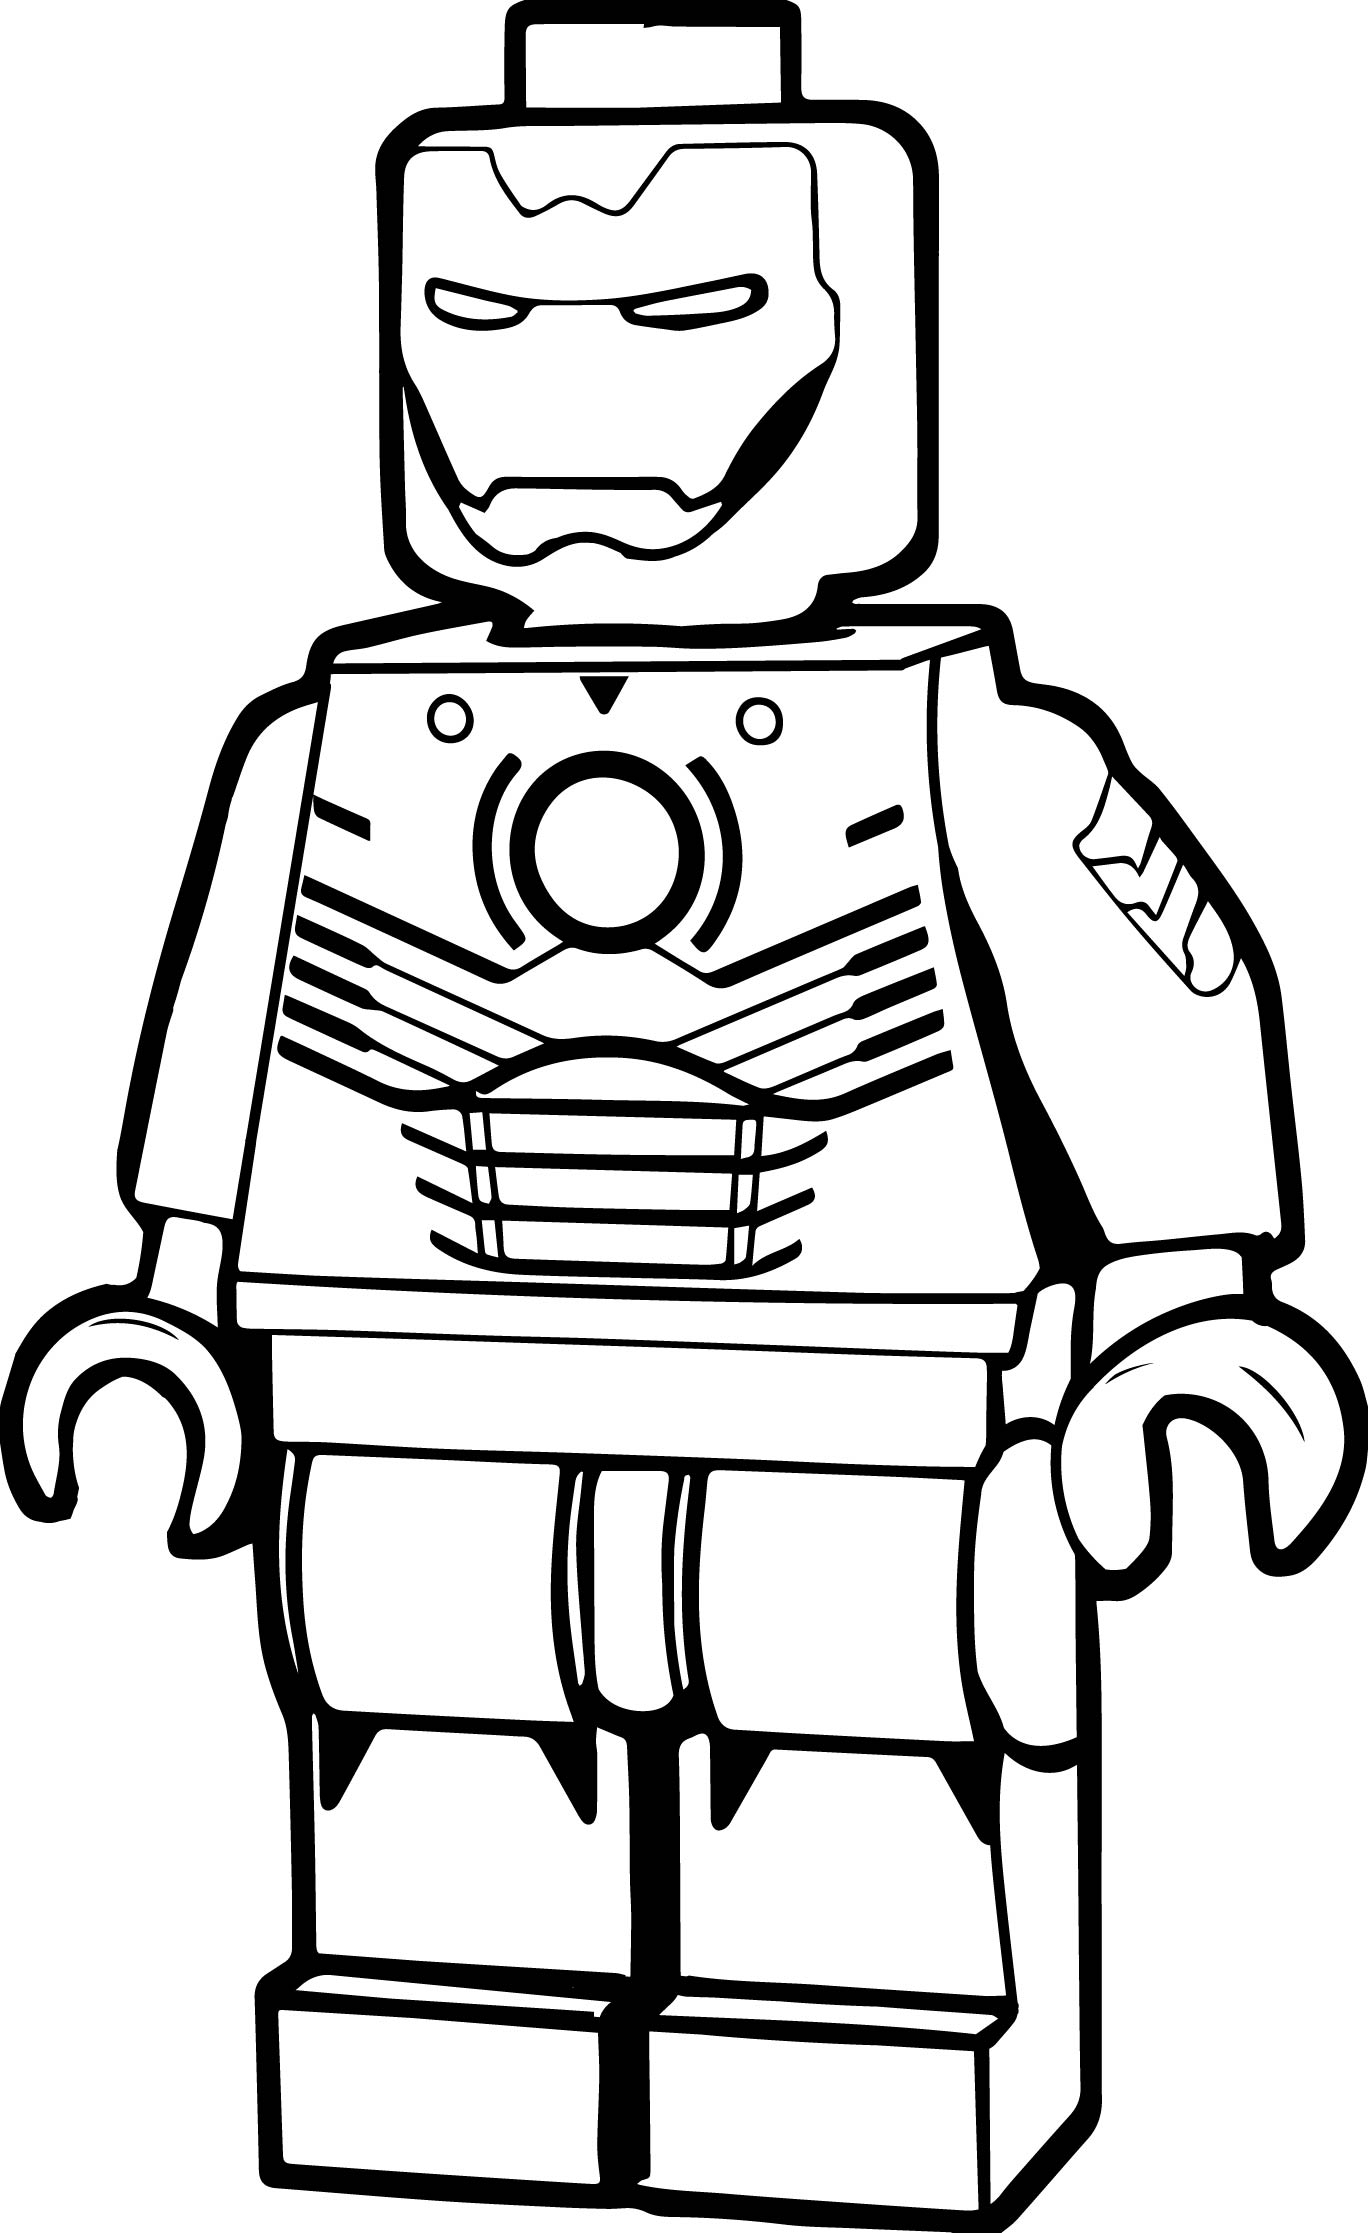 Iron Man Coloring Pages Online Lego Coloring Pages Free Download Best Lego Coloring Pages On